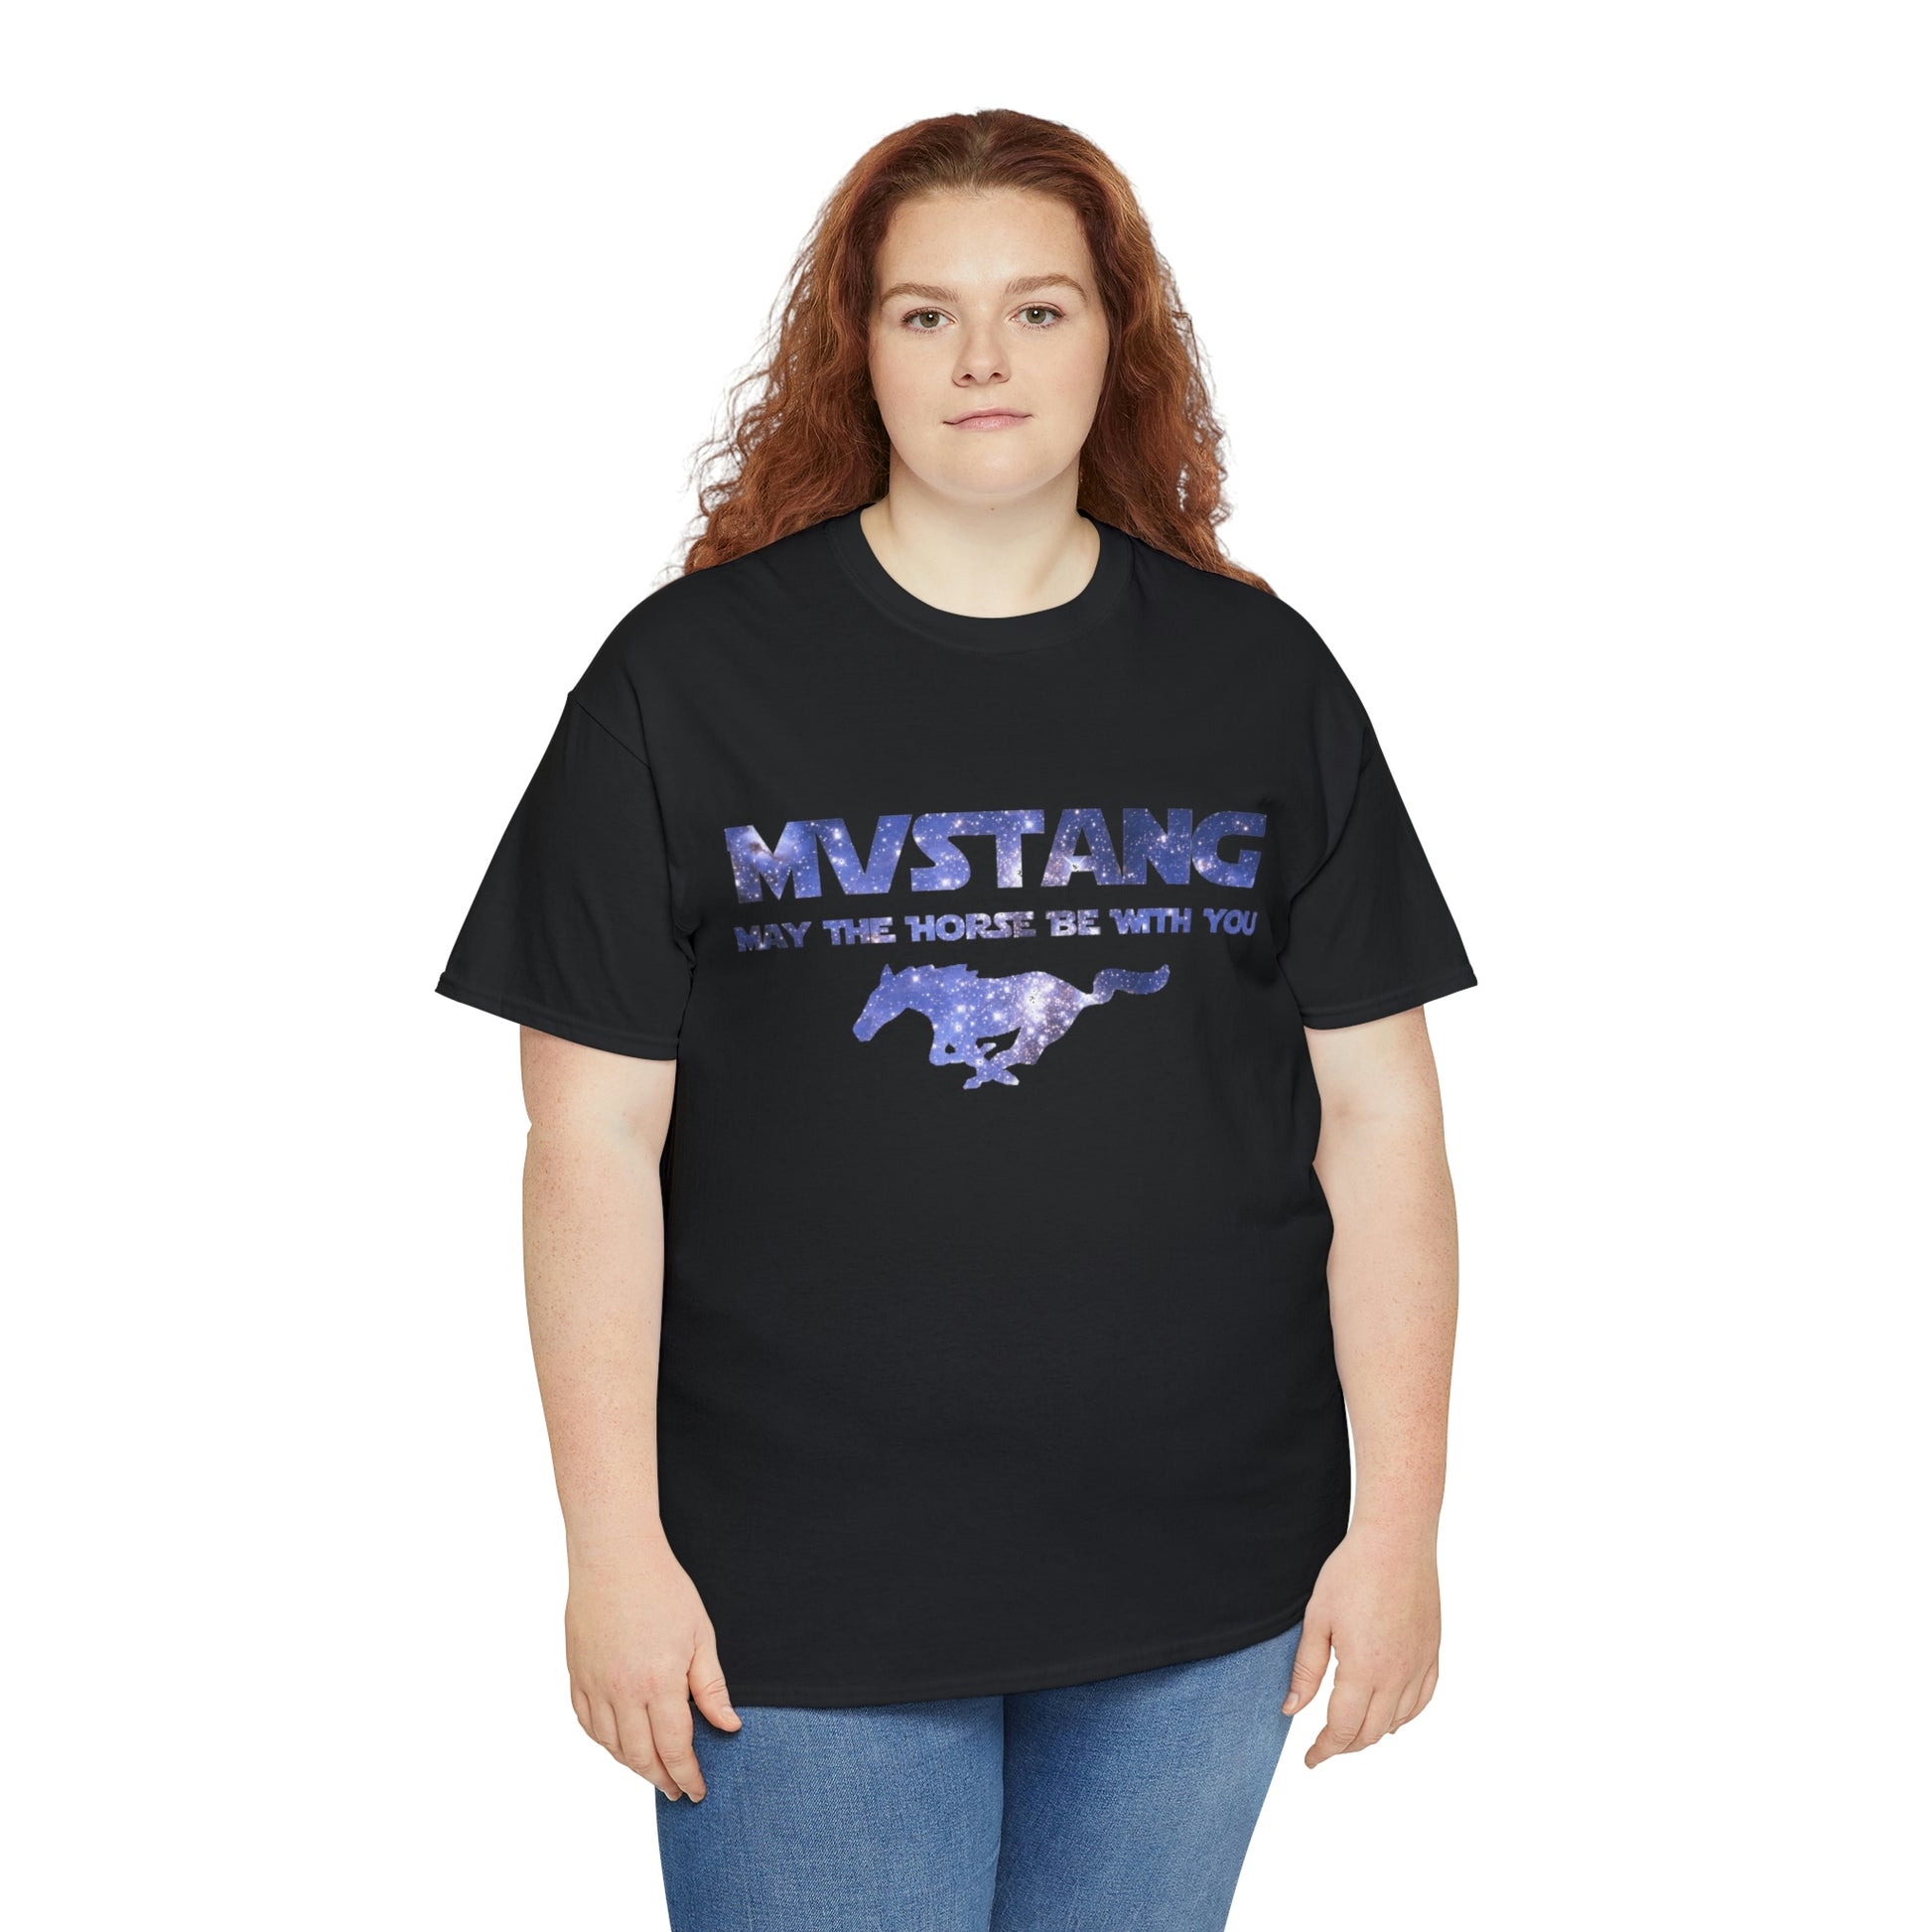 Mustang - May The Horse Be With You Unisex Heavy Cotton Tee